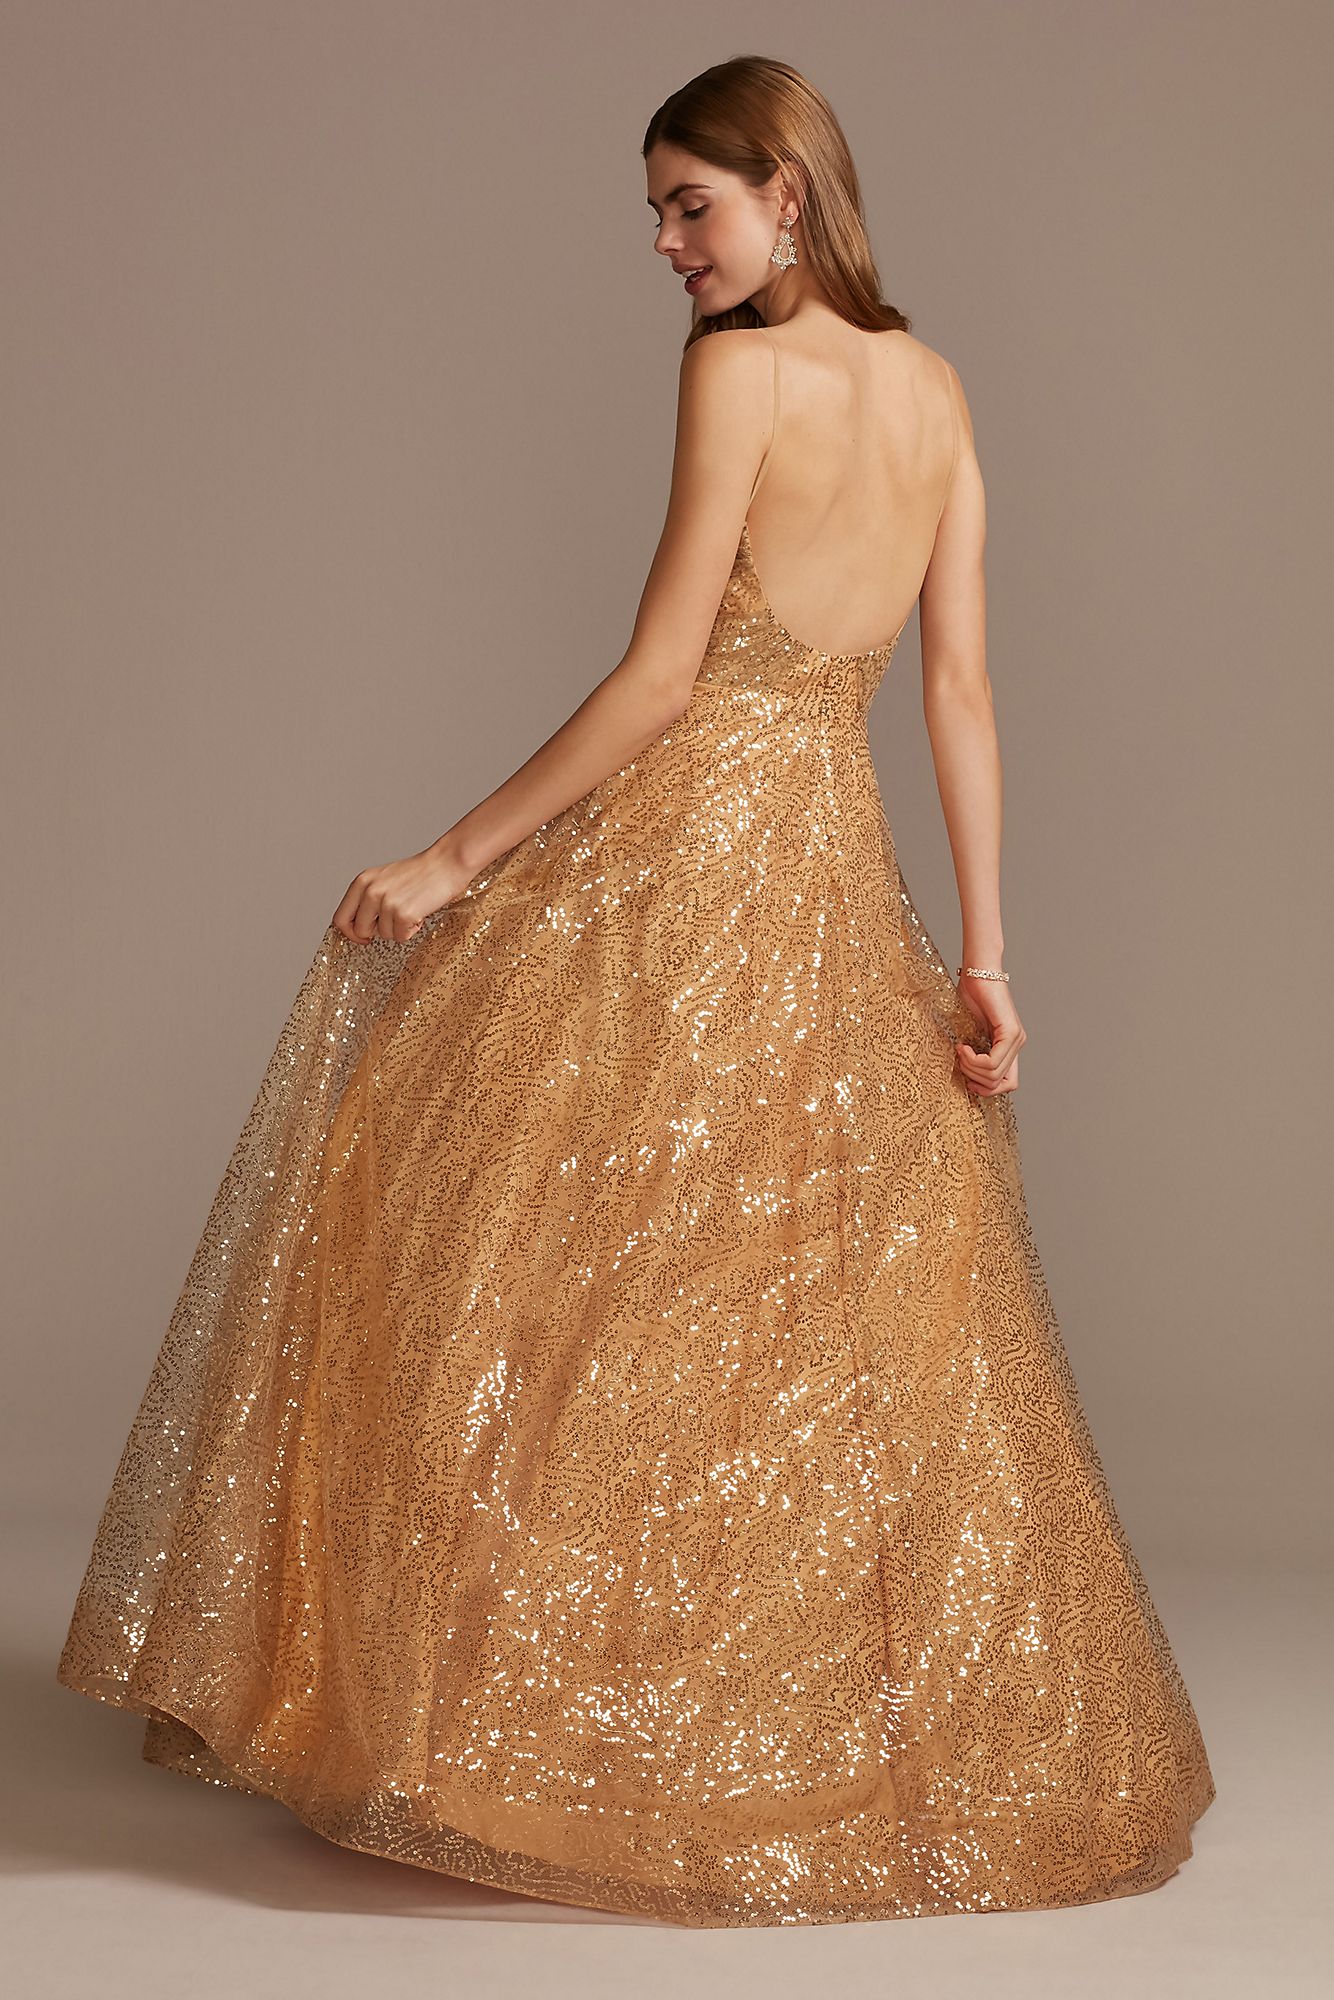 Sequin Spaghetti Strap Low Back Ball Gown  2011P1477